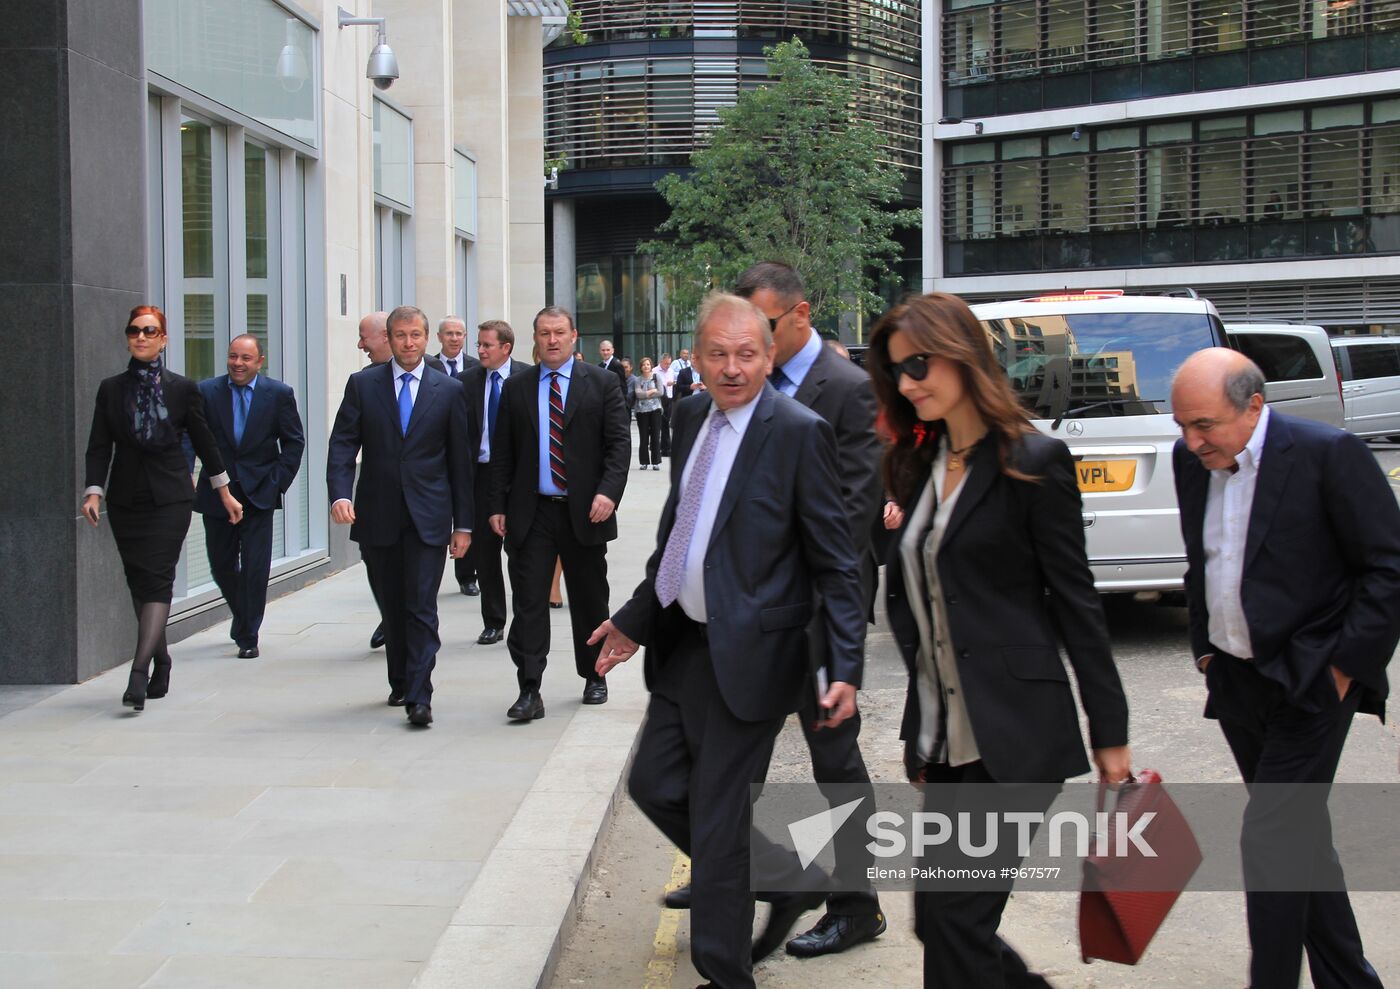 B.Berezovsky and R.Abramovich arrive in High Court in London